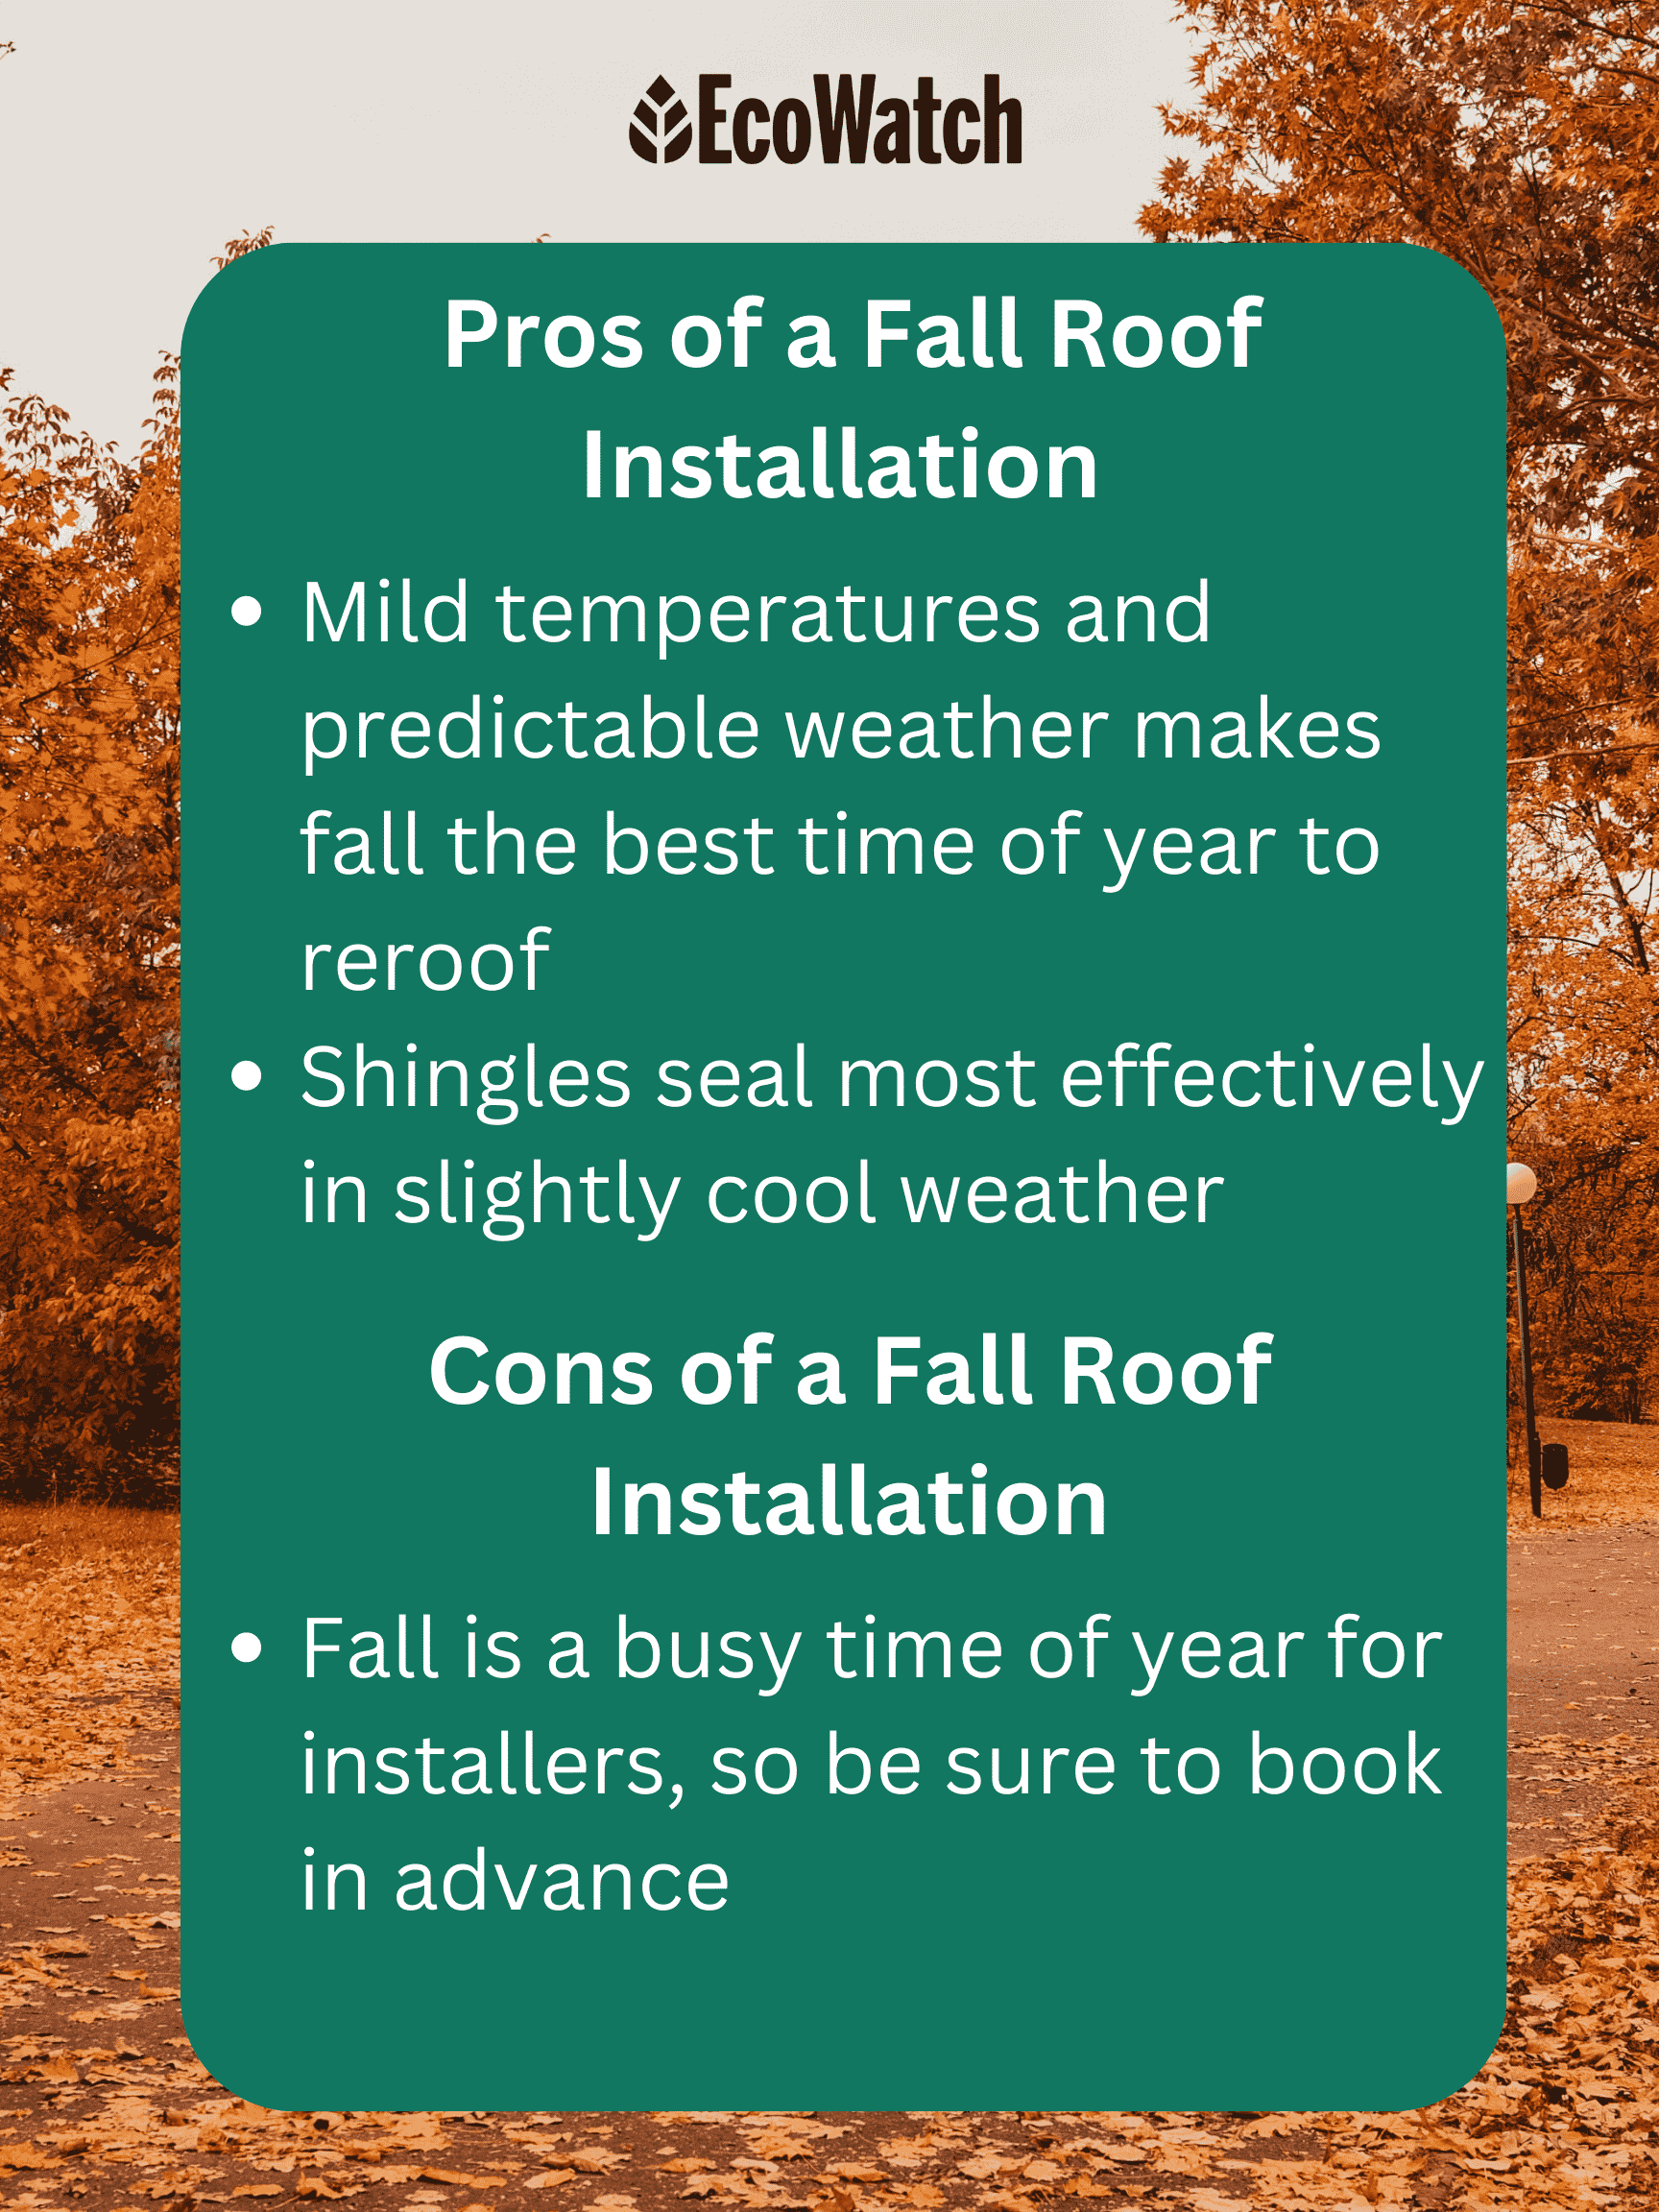 Pros and cons of a fall roof installation